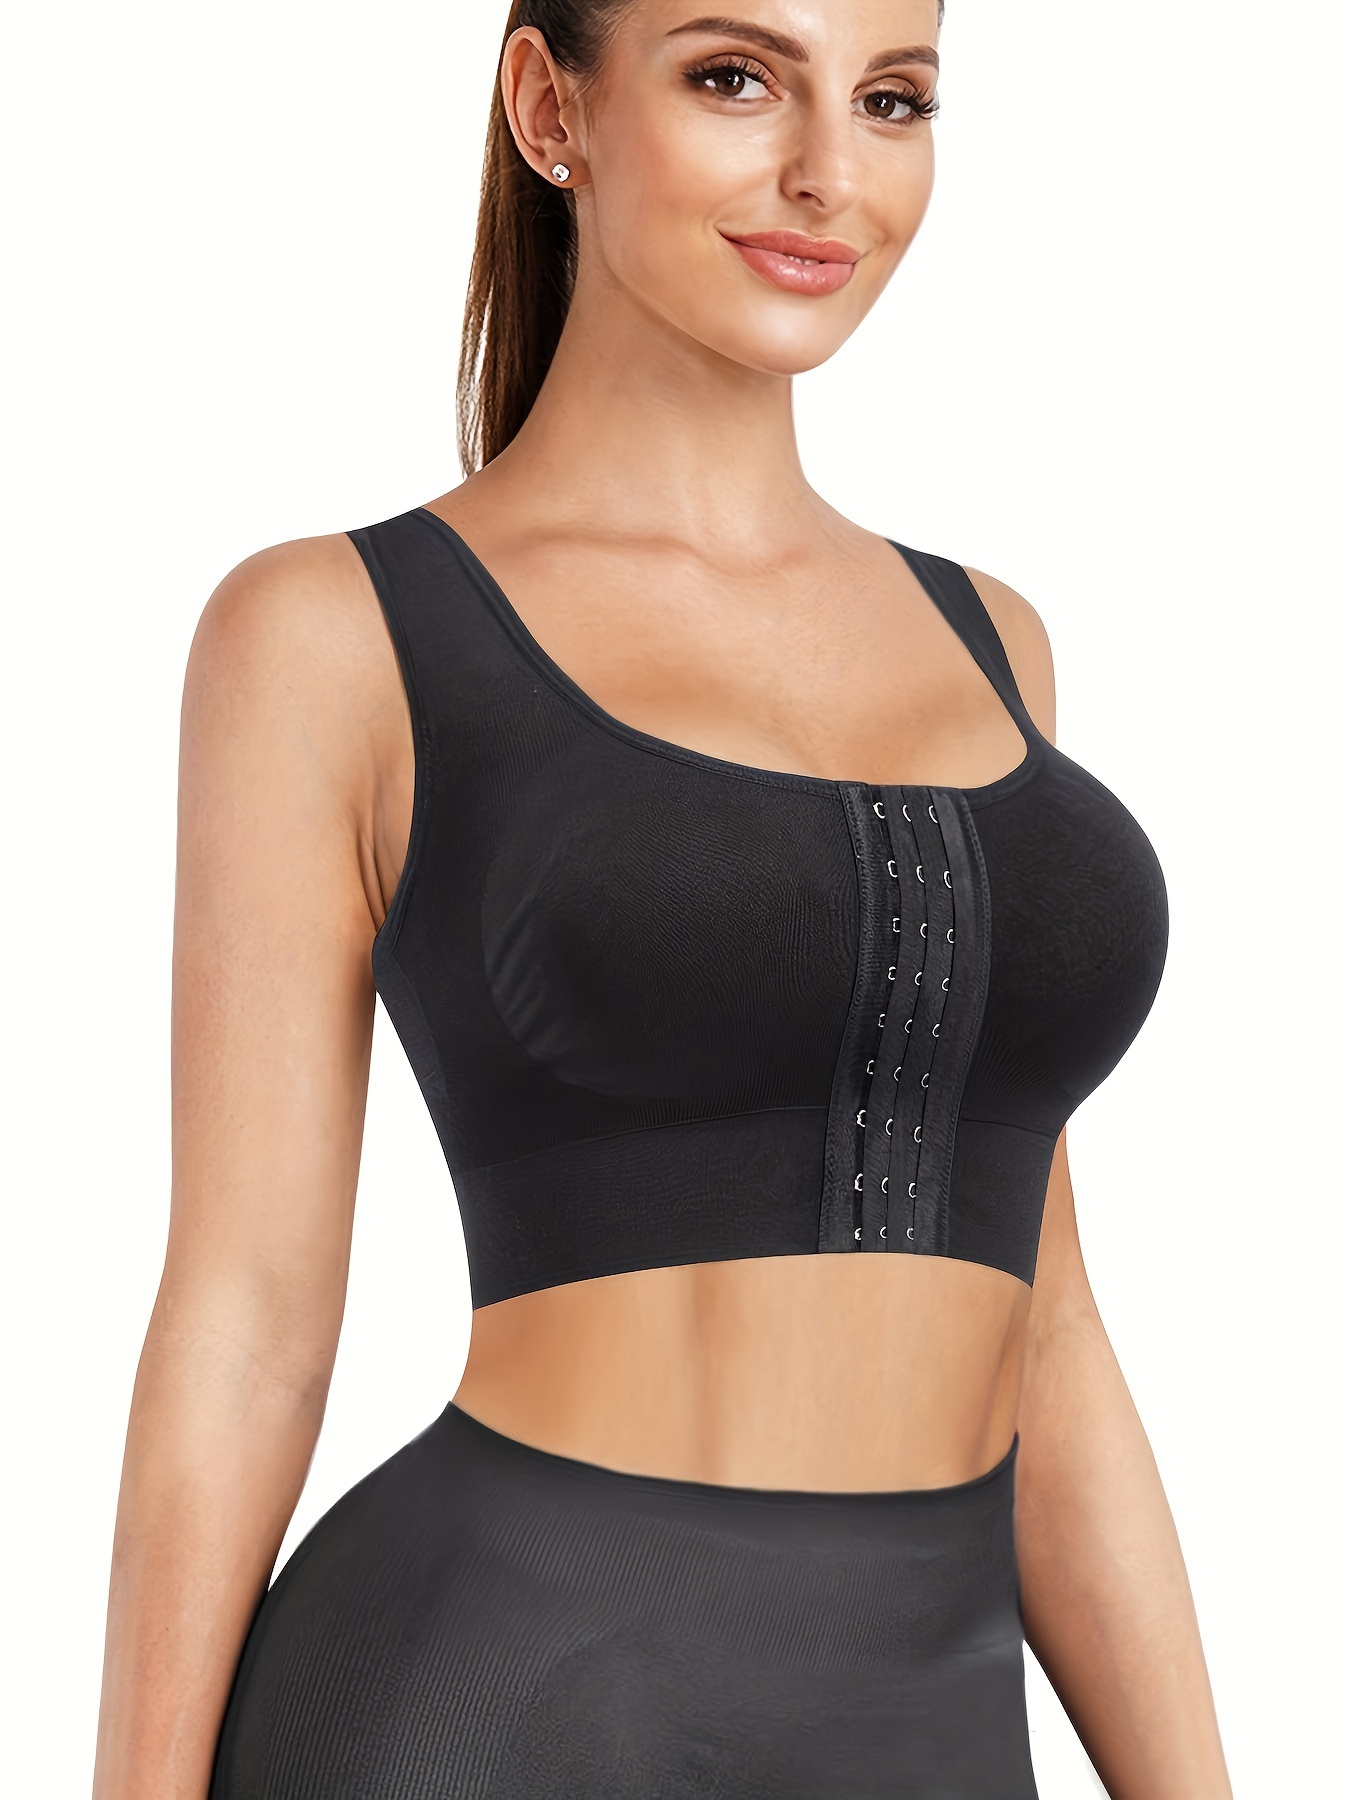 Camisole Bra Bra for Women Front Closure Shaping Push Up Seamless